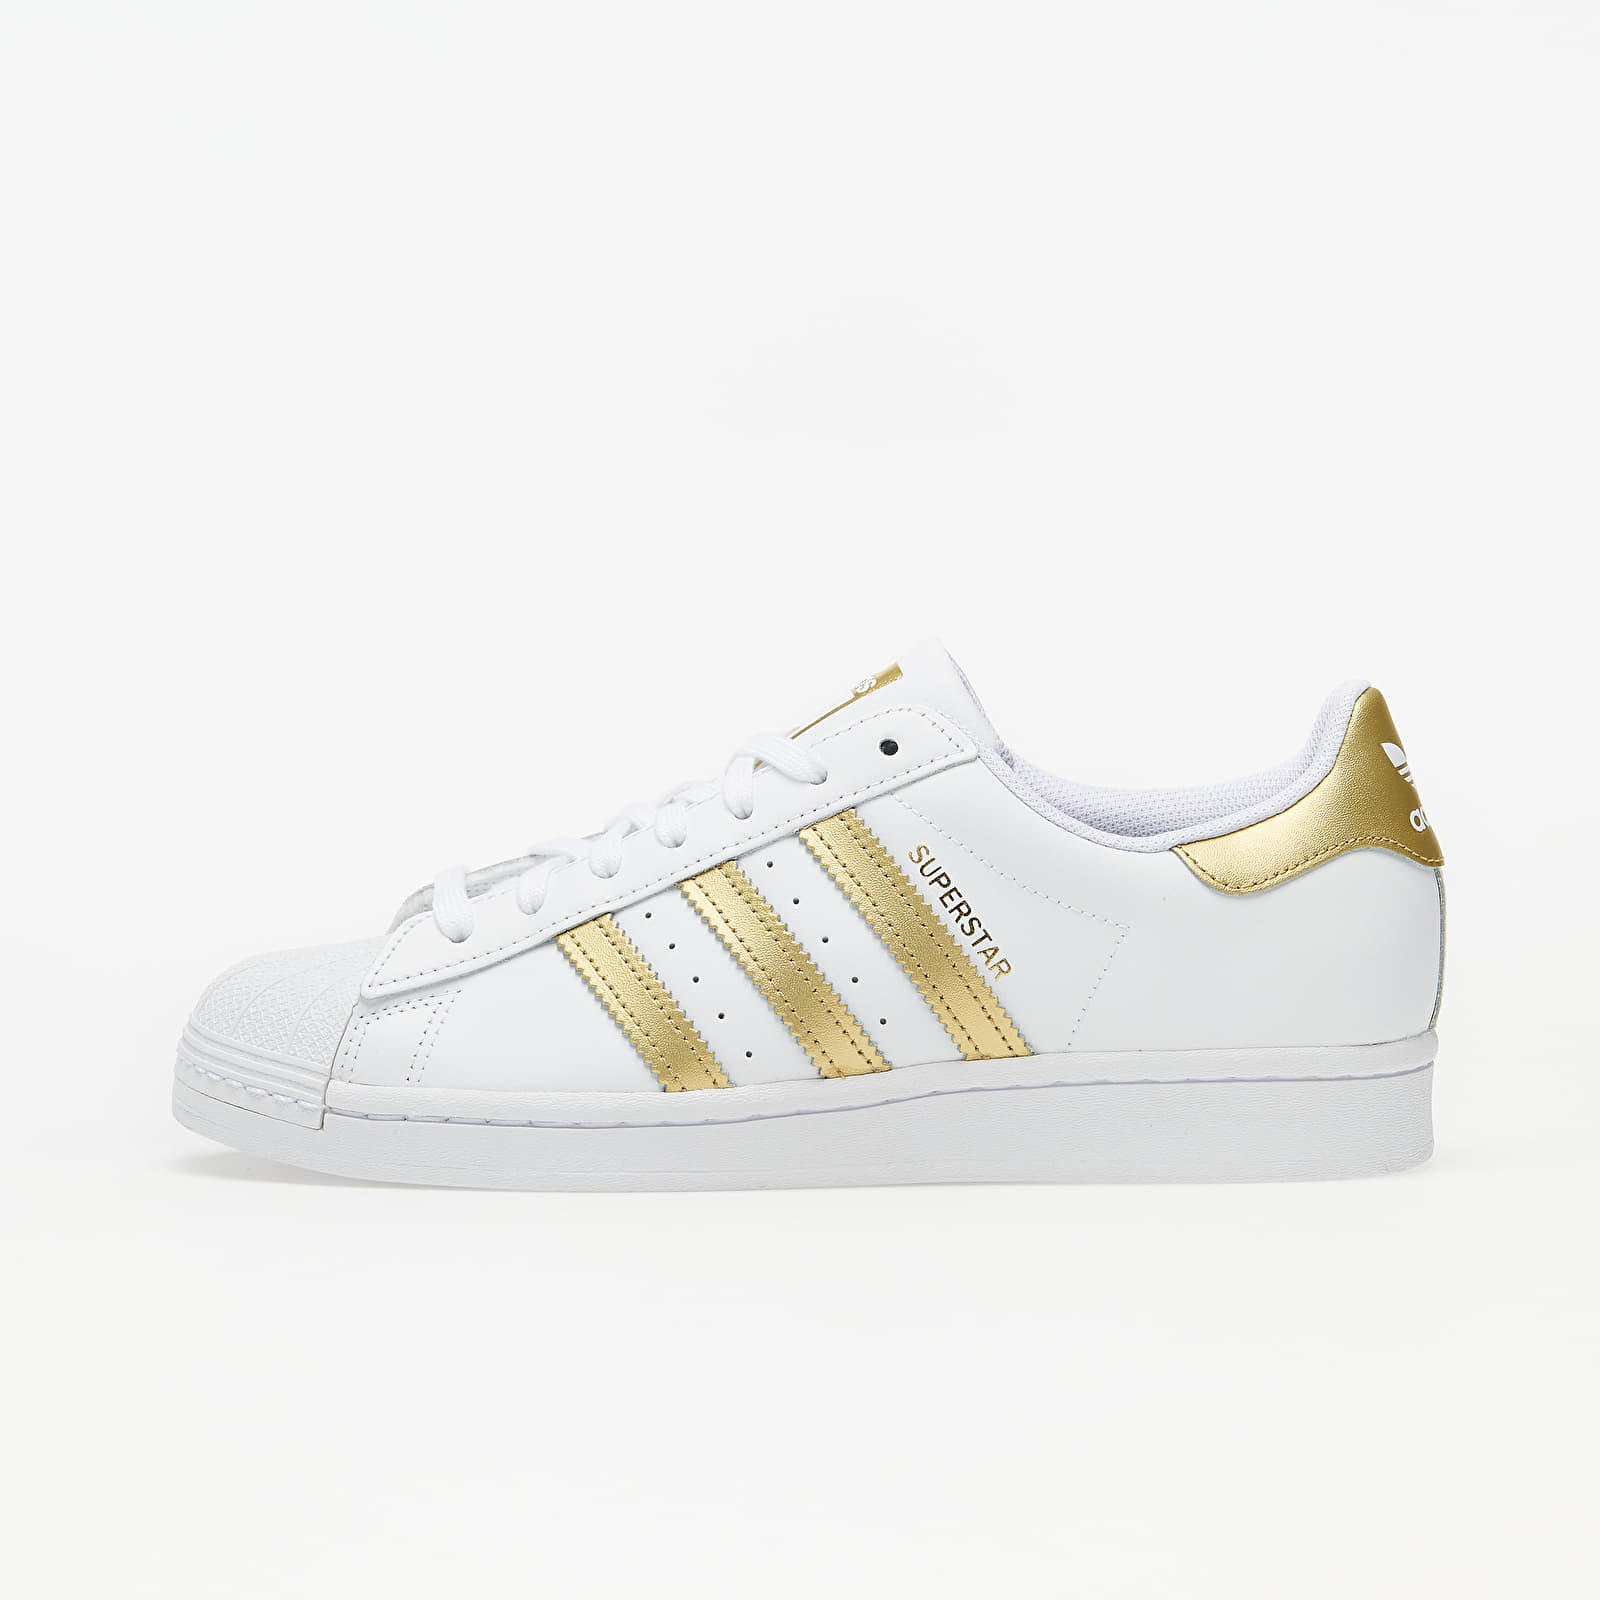 Women's shoes adidas Superstar W Ftw White/ Gold Metalic/ Ftw White